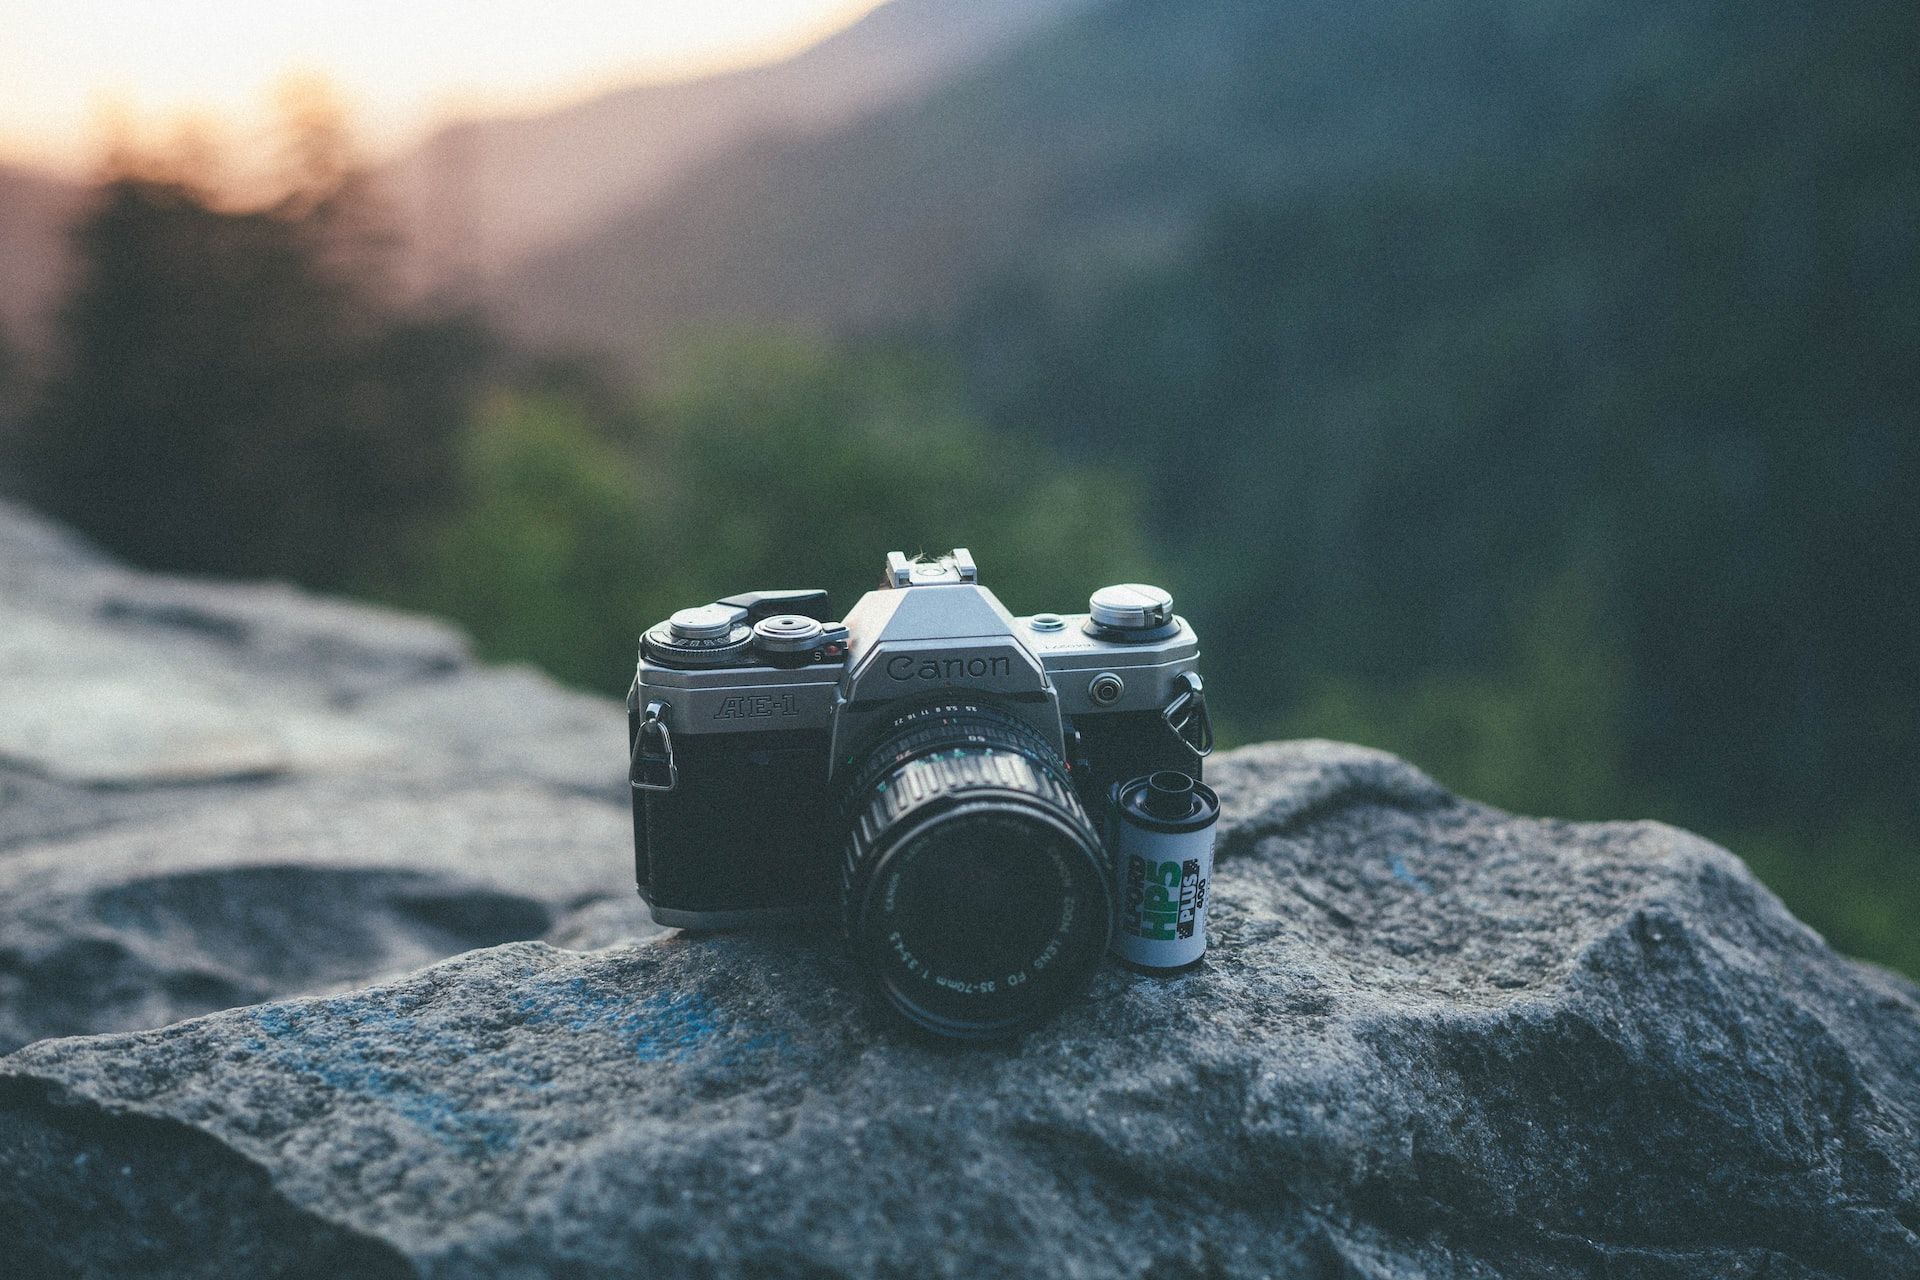 canon ae1 sitting on rock next to a roll of film